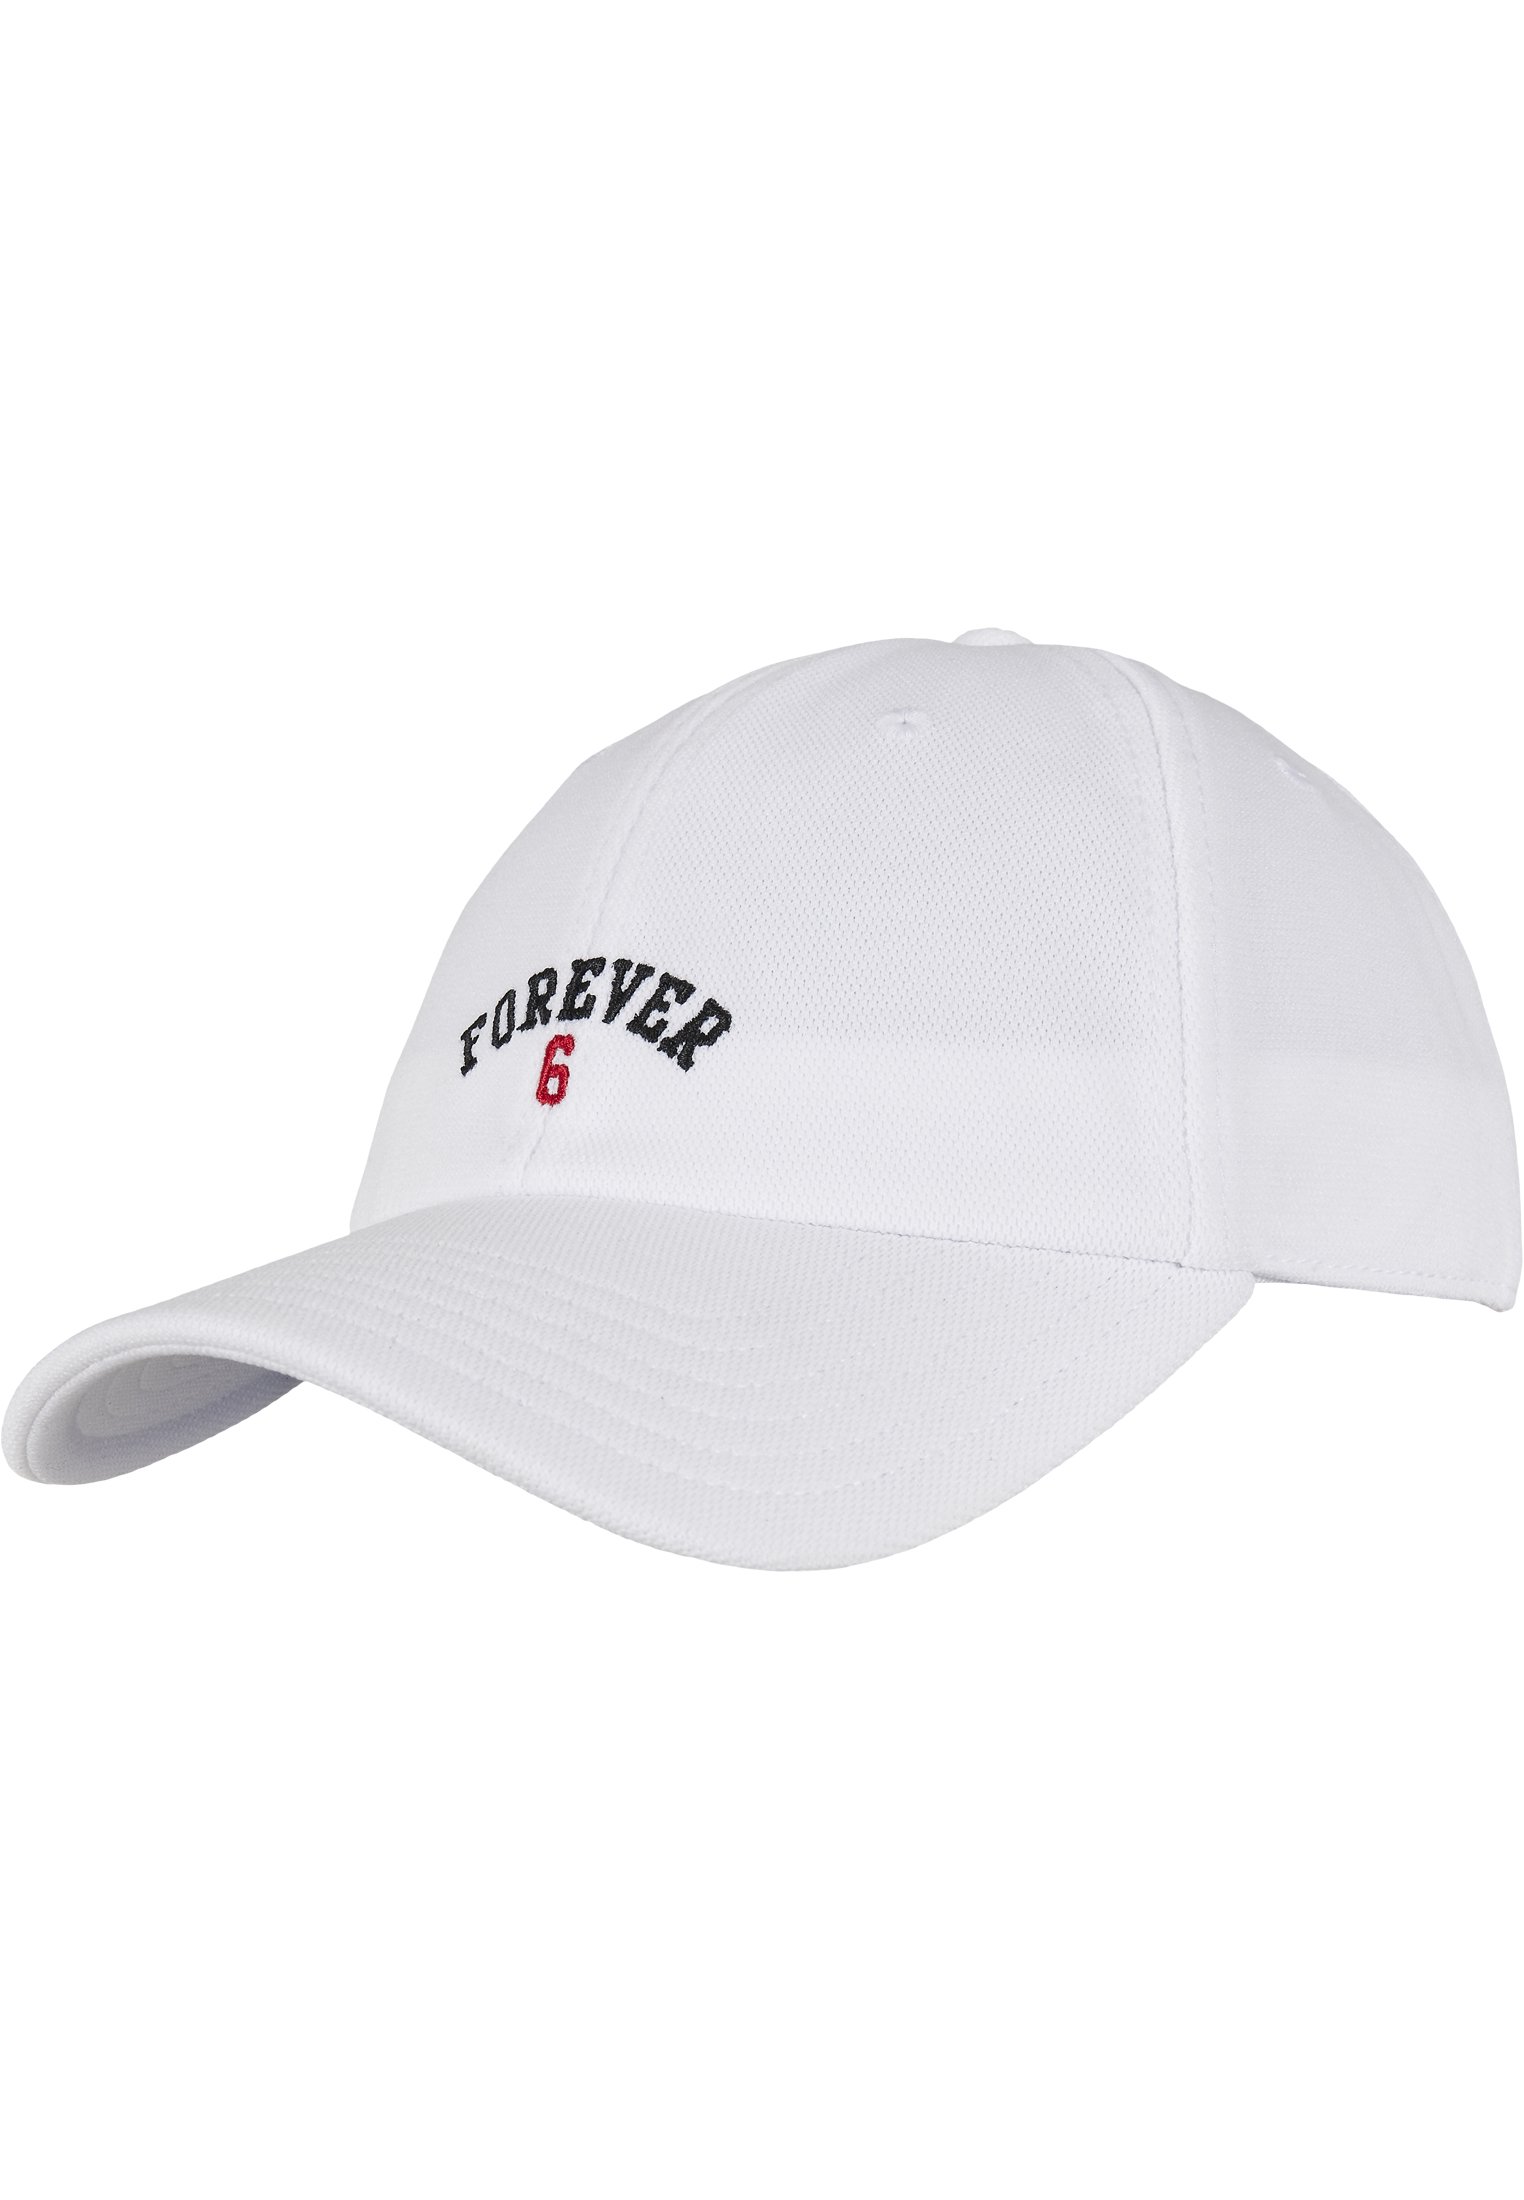 C&S WL Forever Six Curved Cap white/mc one size